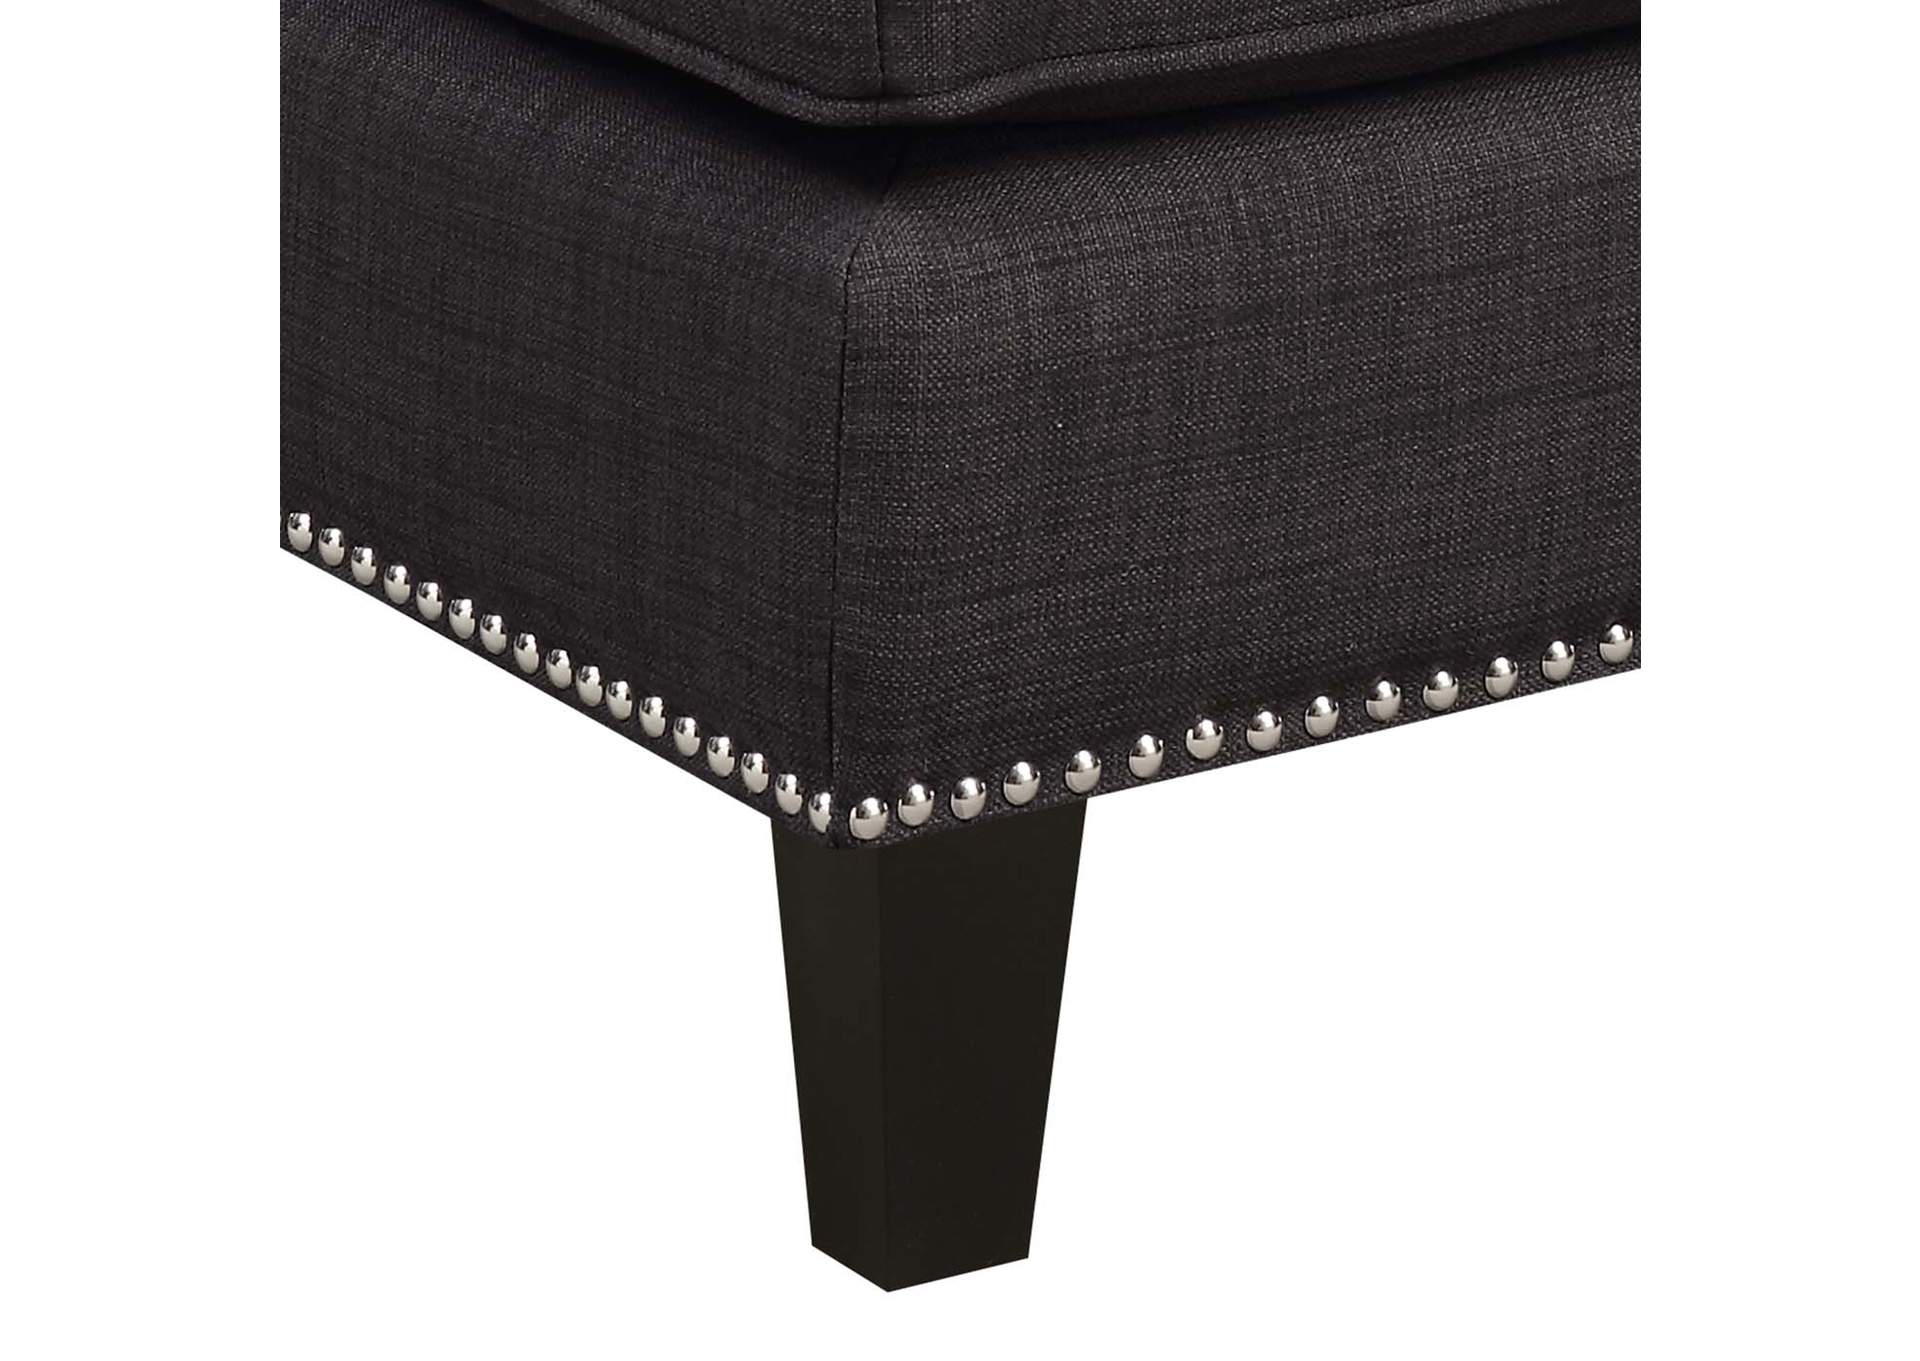 Erica 497 Ottoman With Chrome Nail Heirloom Charcoal,Elements